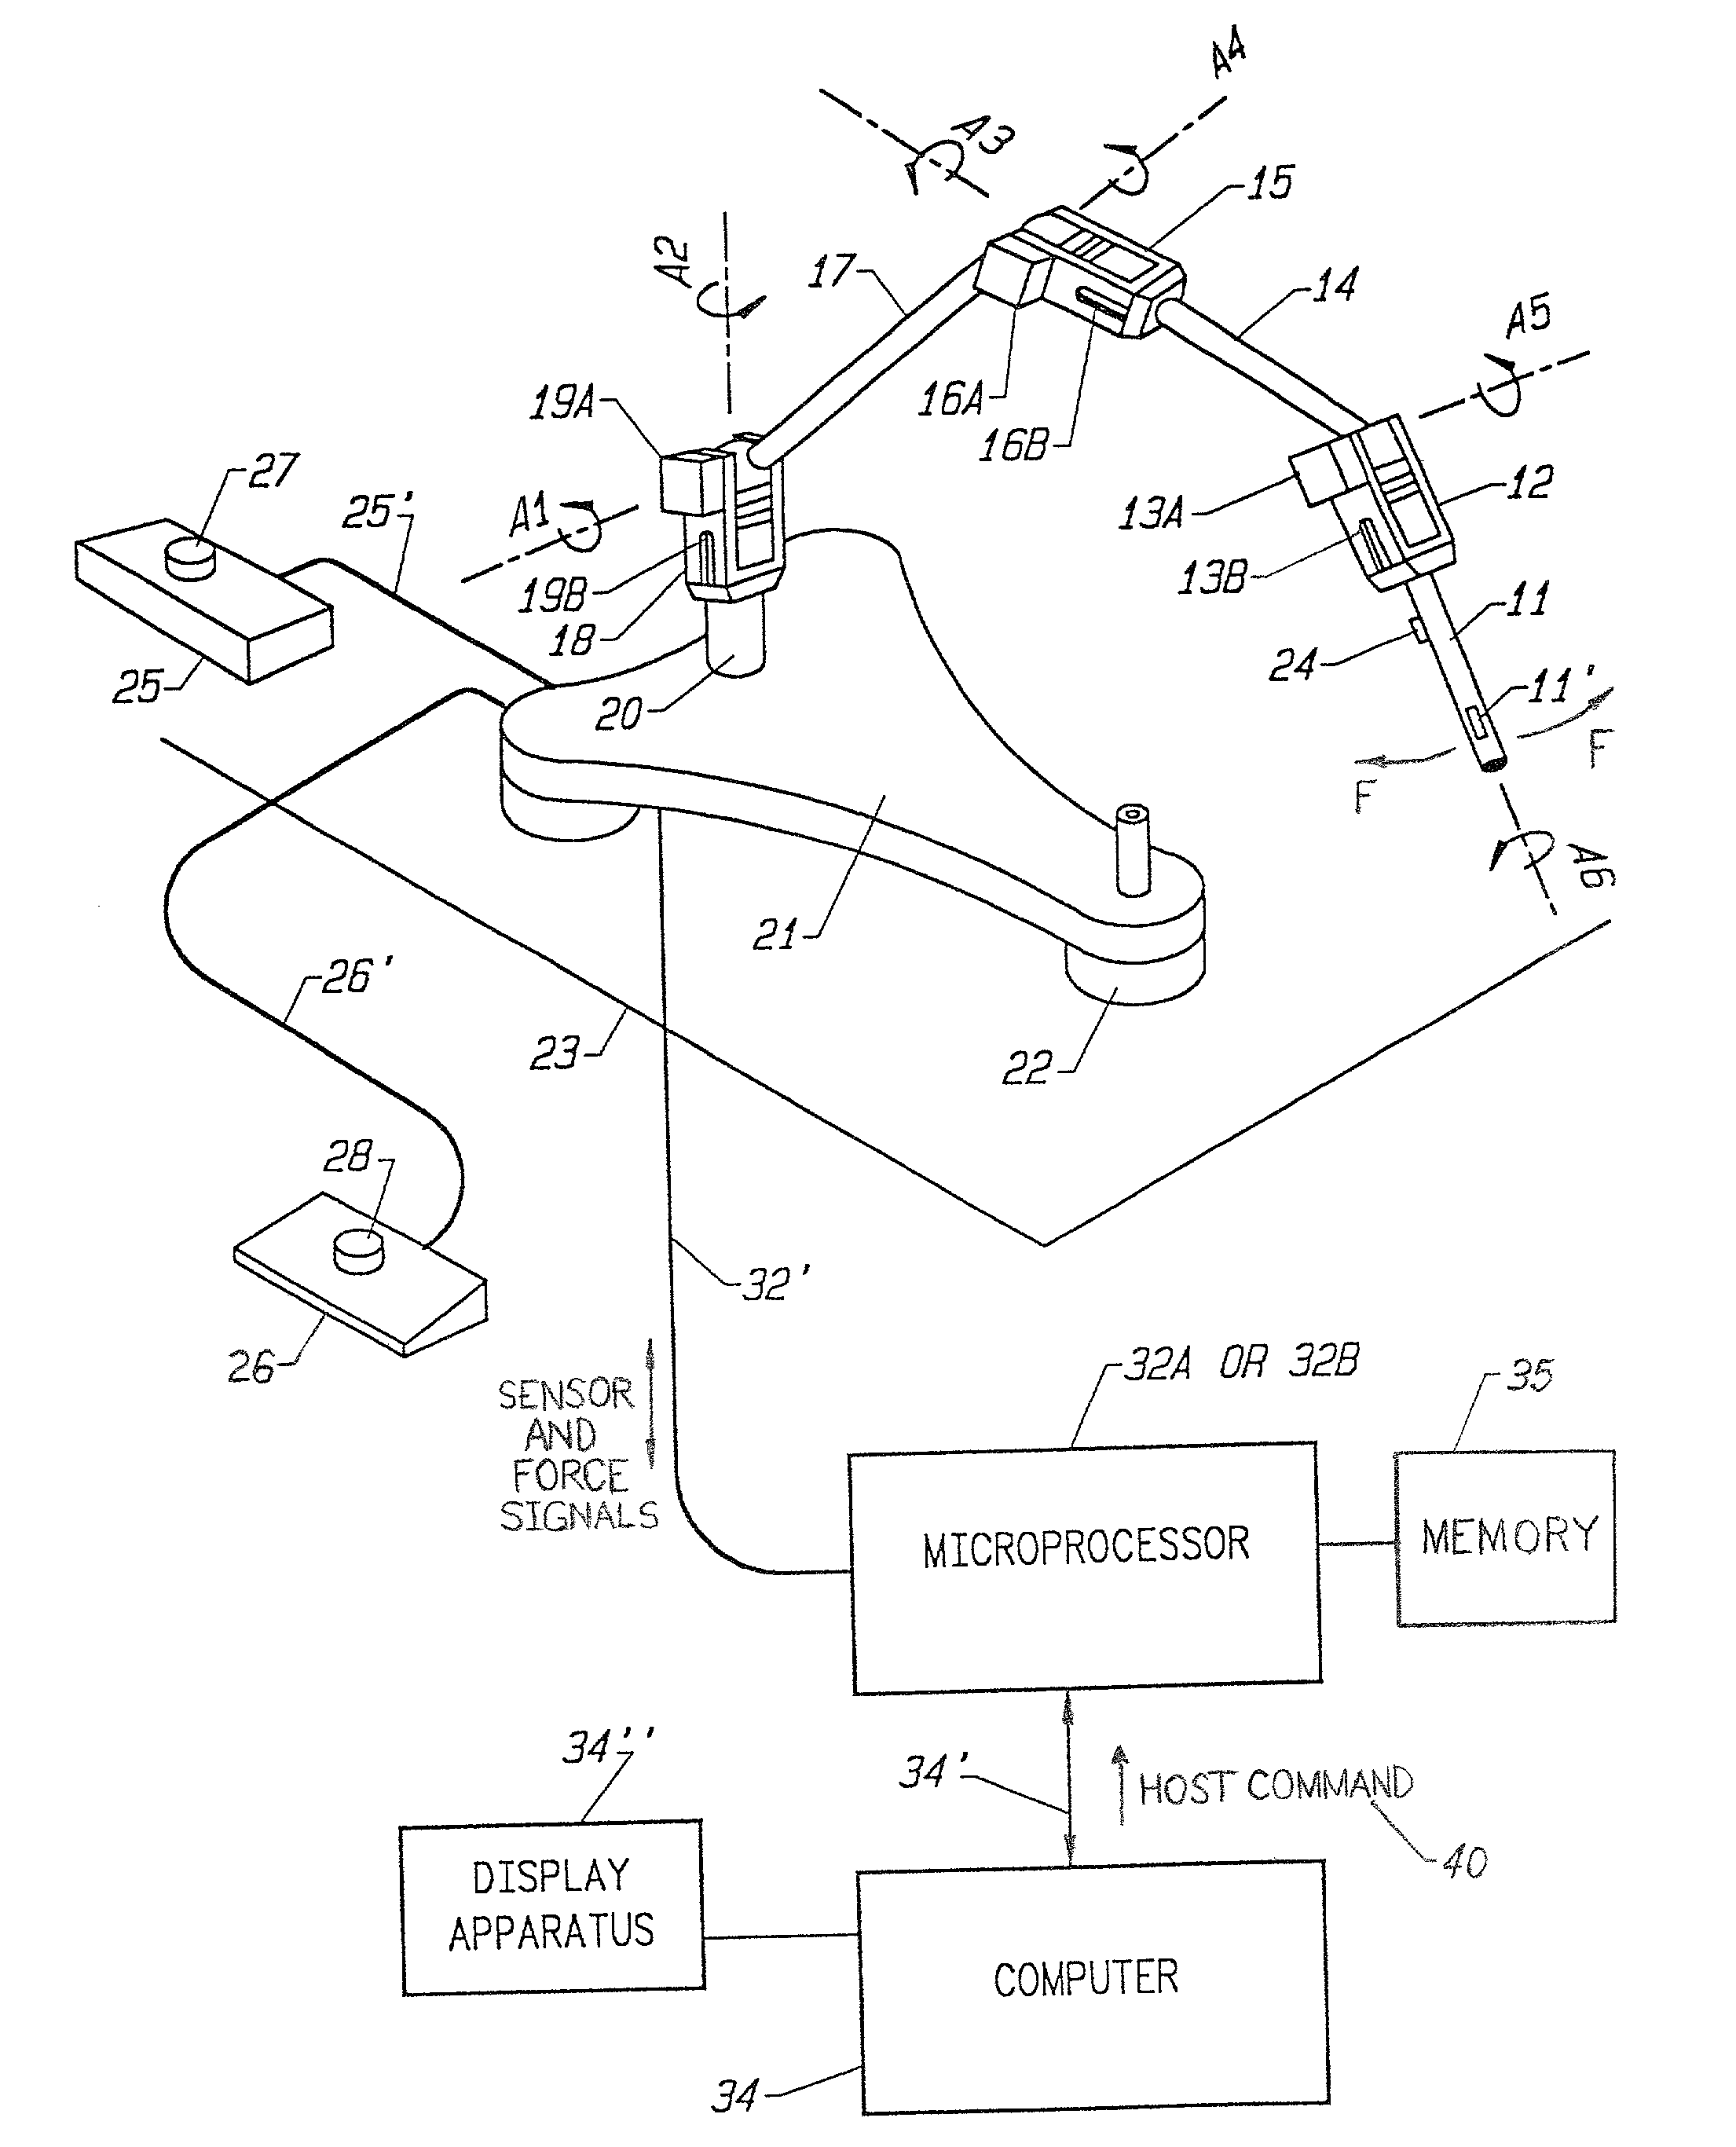 Interface device for sensing position and orientation and outputting force to a user